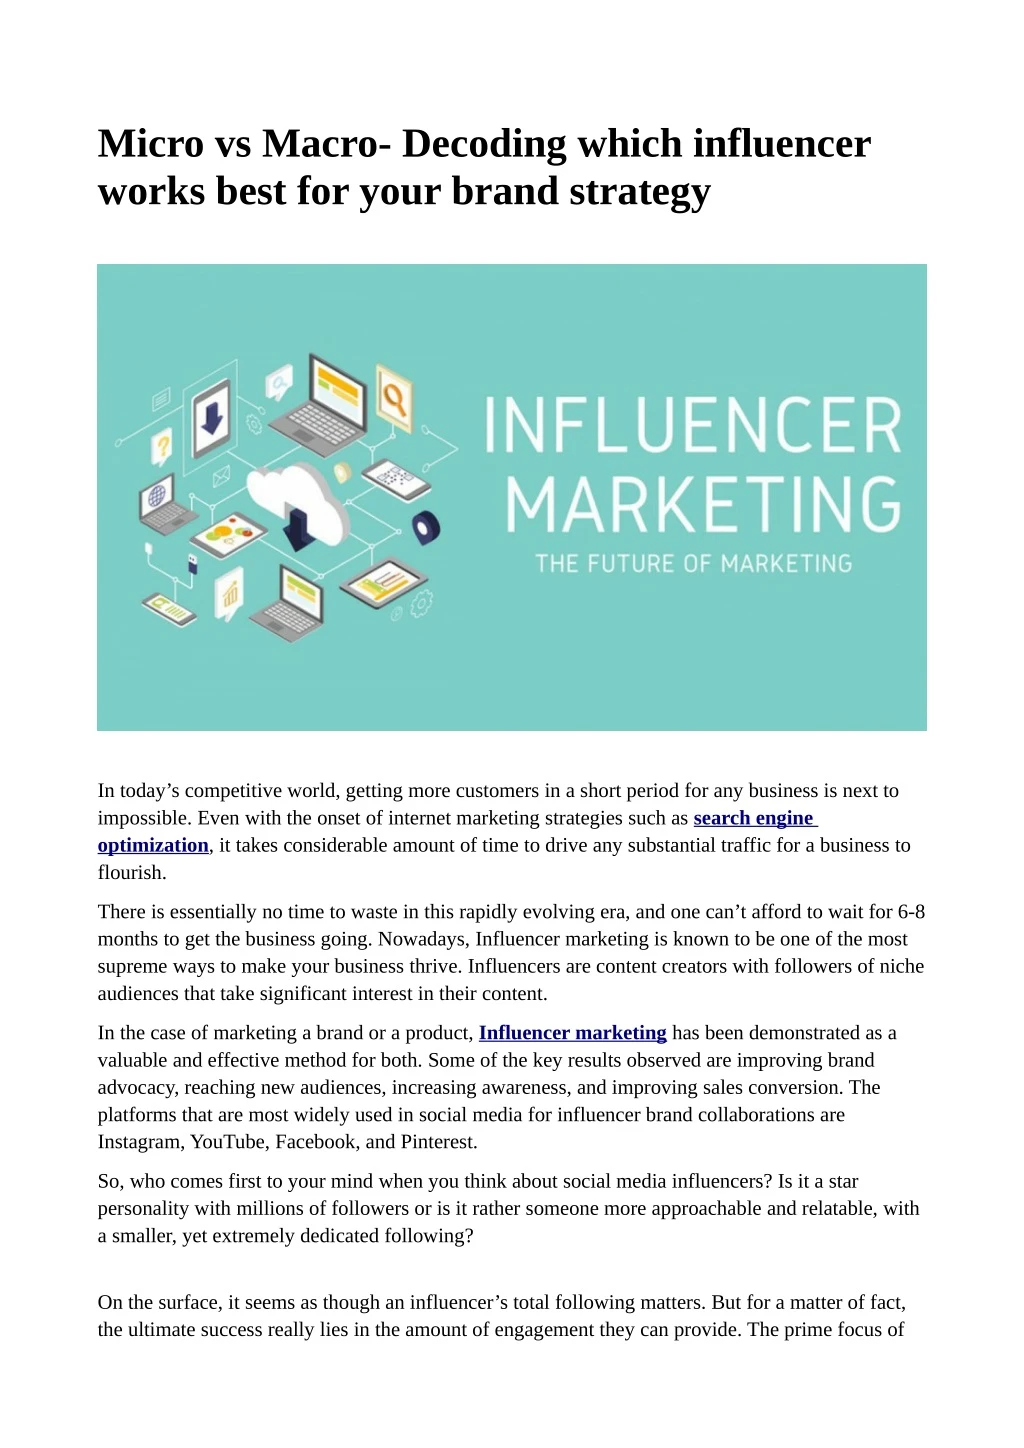 micro vs macro decoding which influencer works